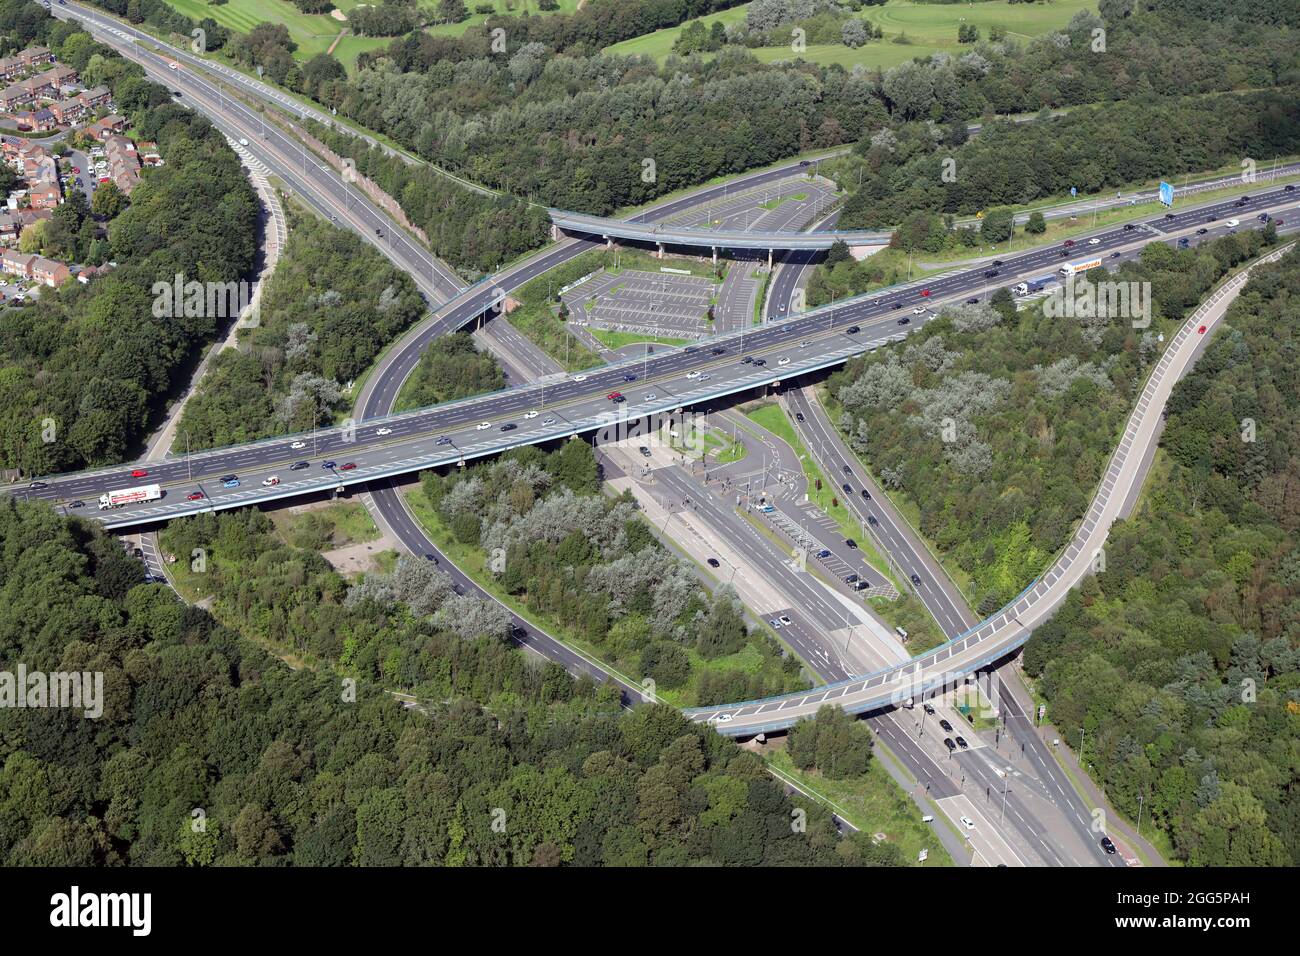 aerial view of the A580 Wardley Park & Ride facility at junction 14 of the M60 motorway where it meets the A580 road at Wardley, Swinton, Manchester Stock Photo